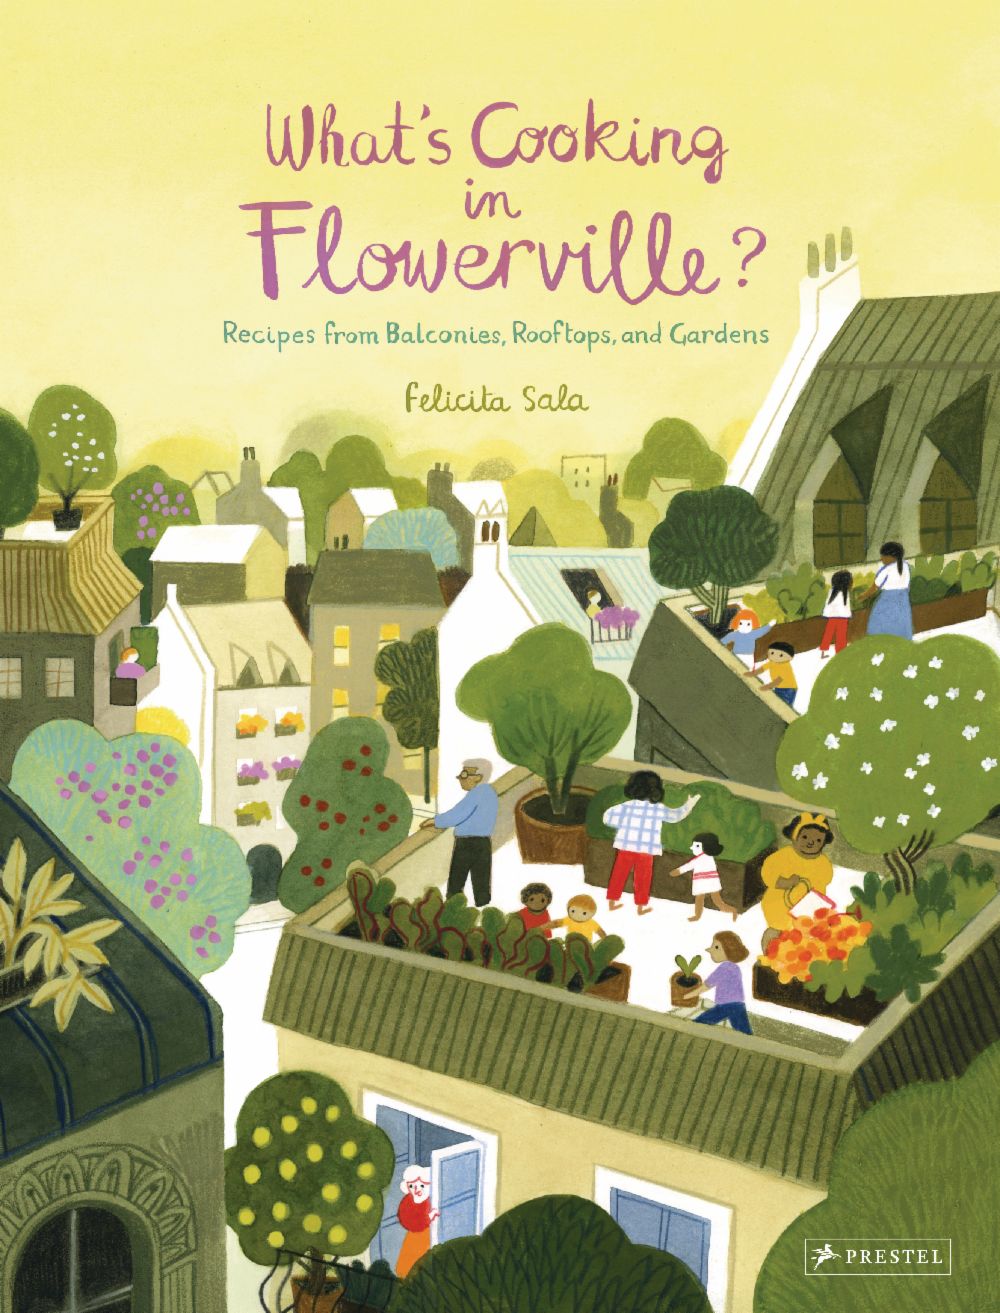 What's Cooking in Flowerville